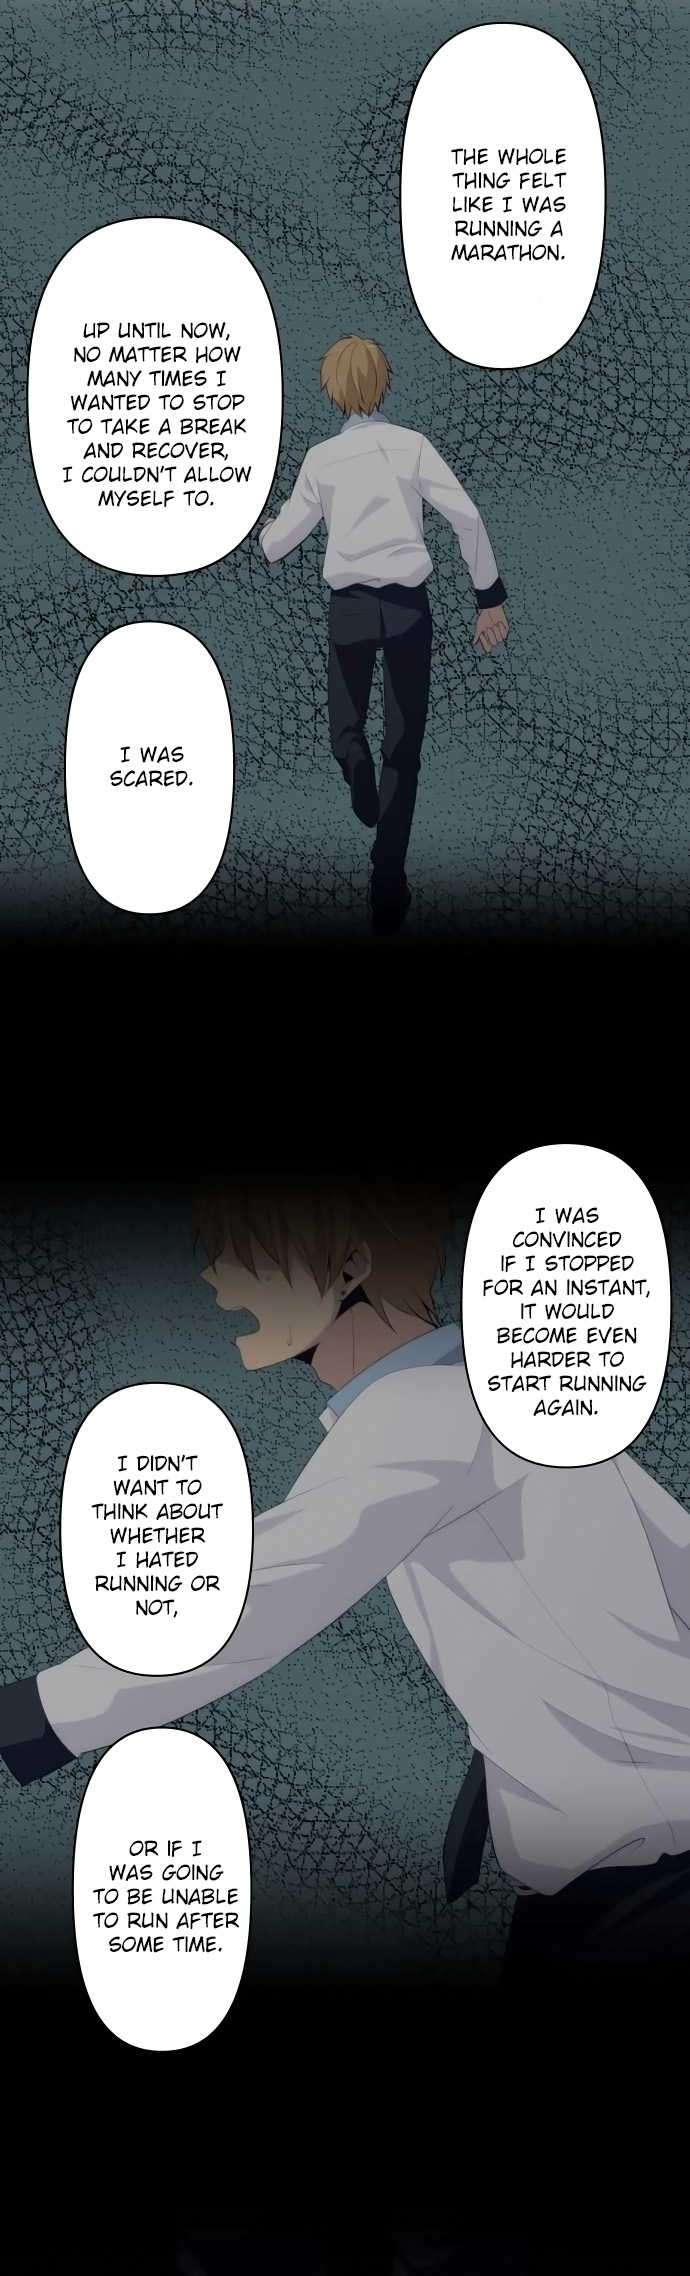 ReLIFE Ch.176